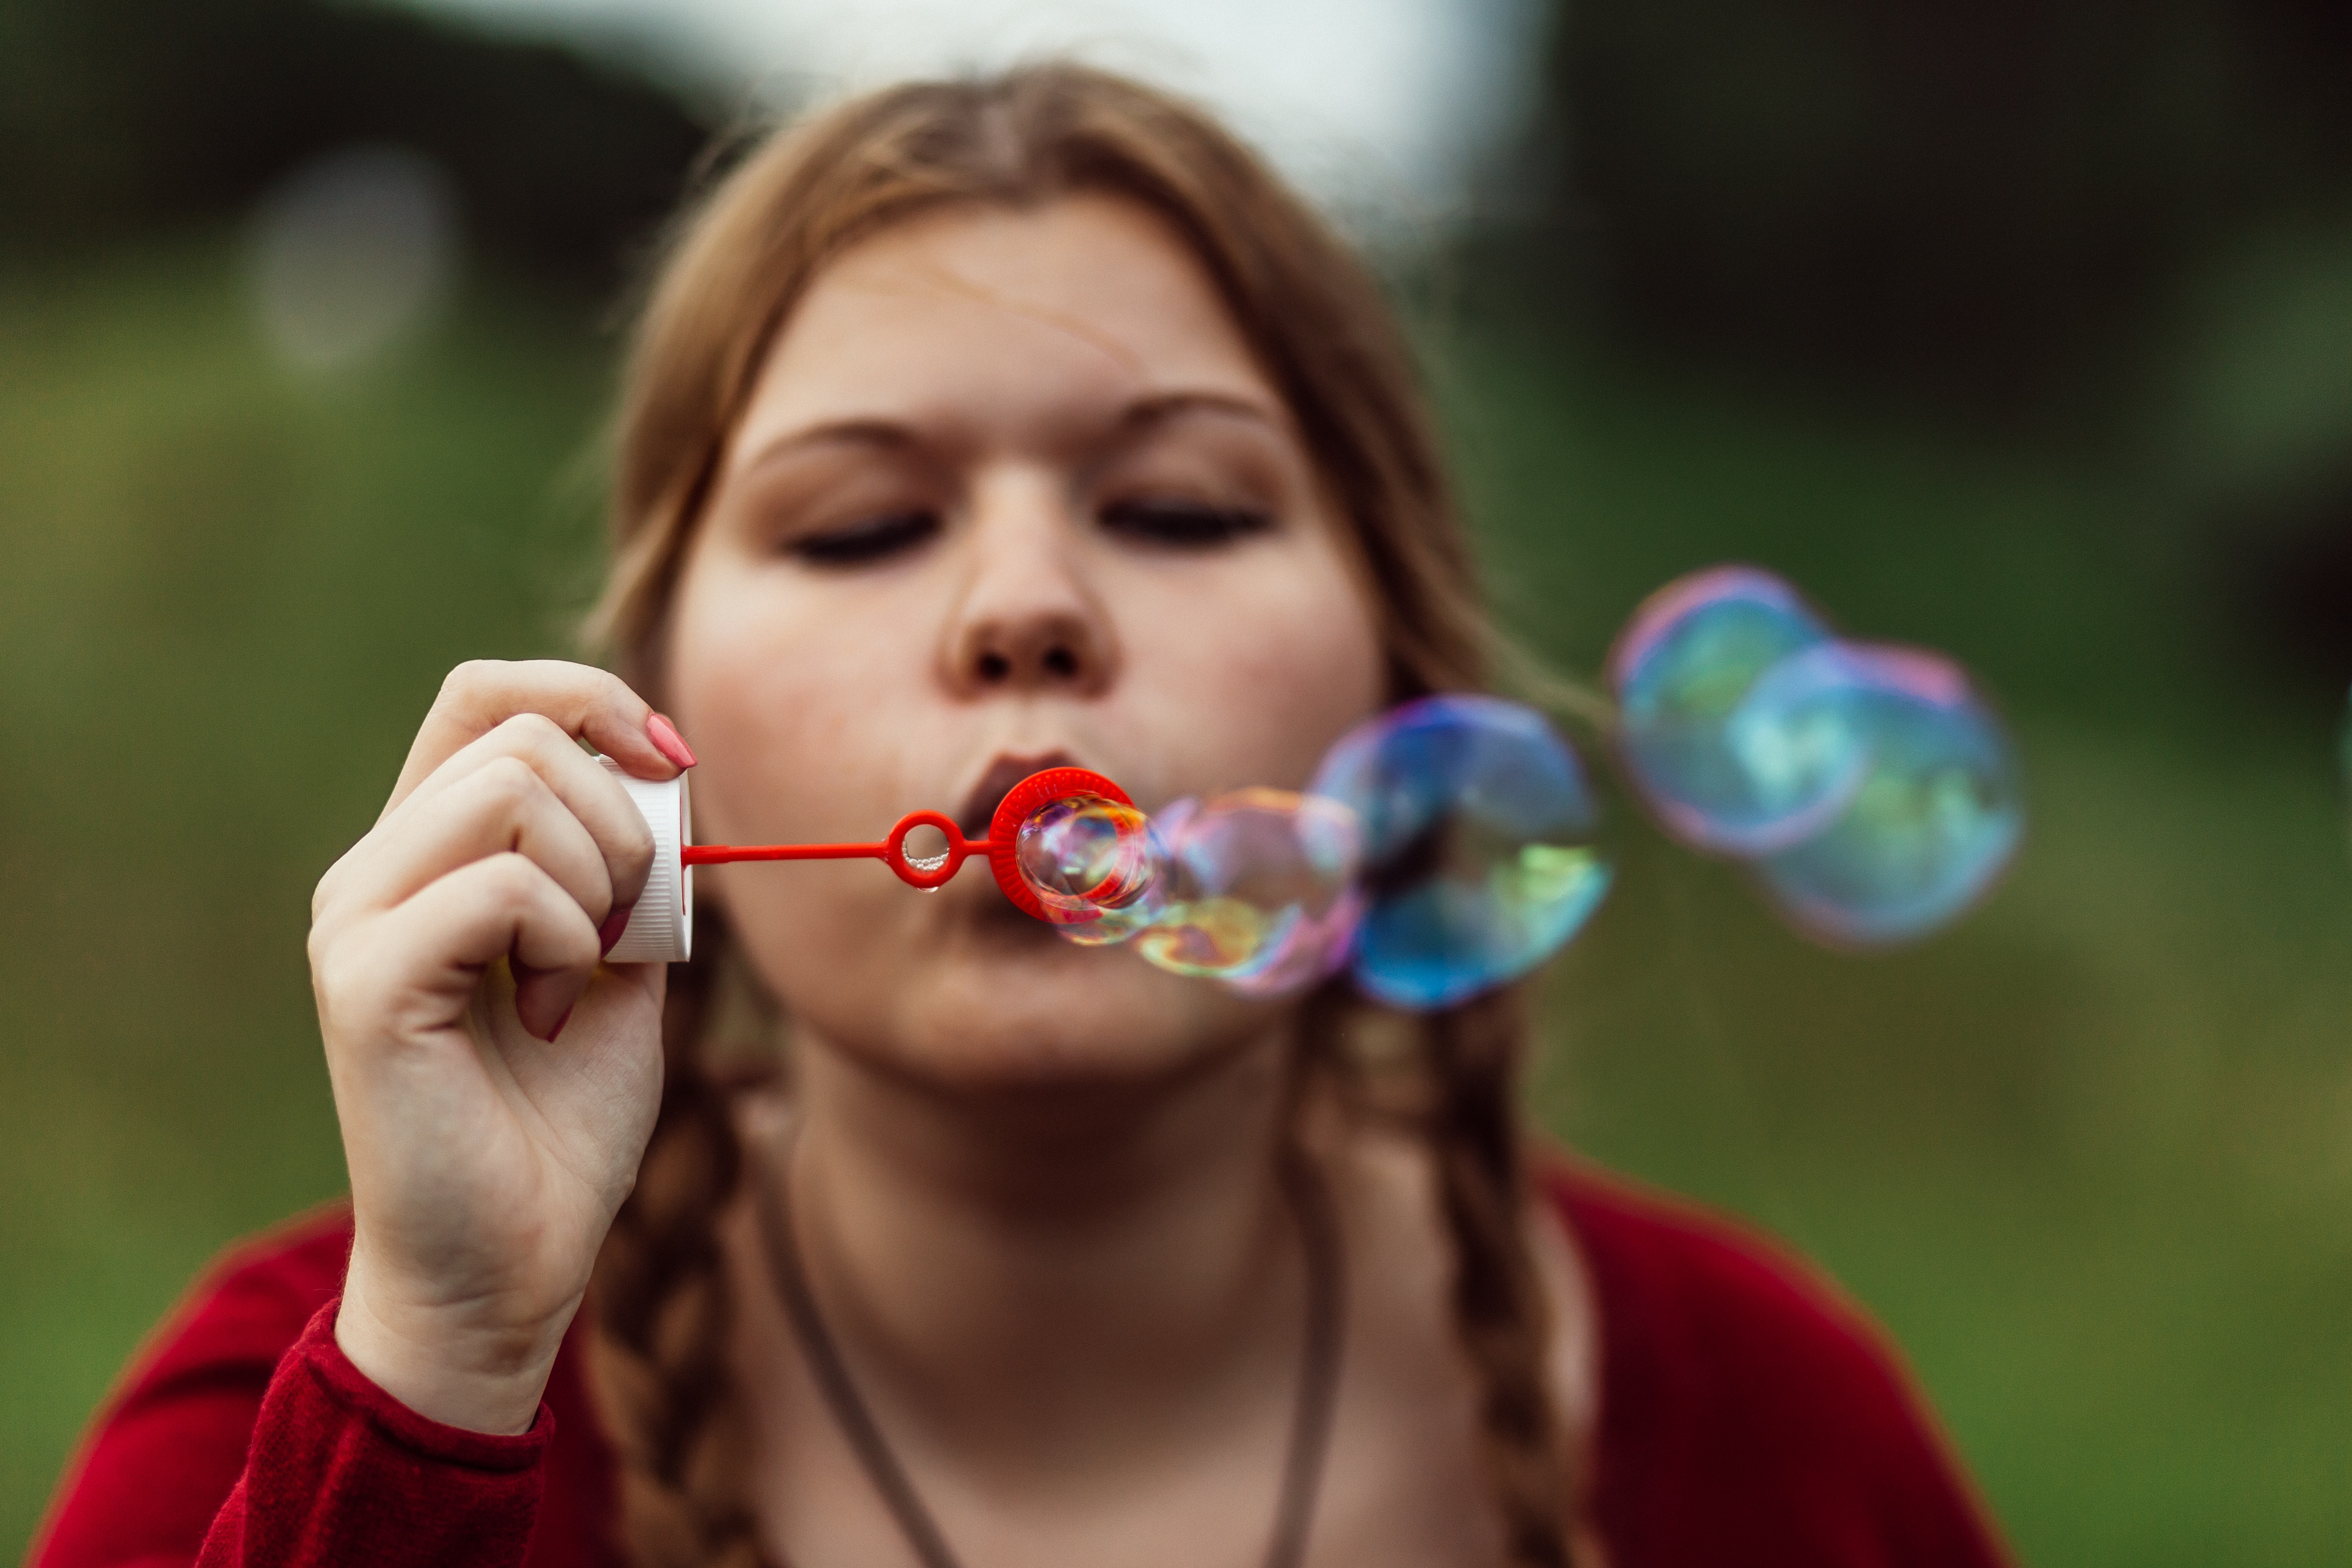 Woman in red top blowing red bubble maker photo